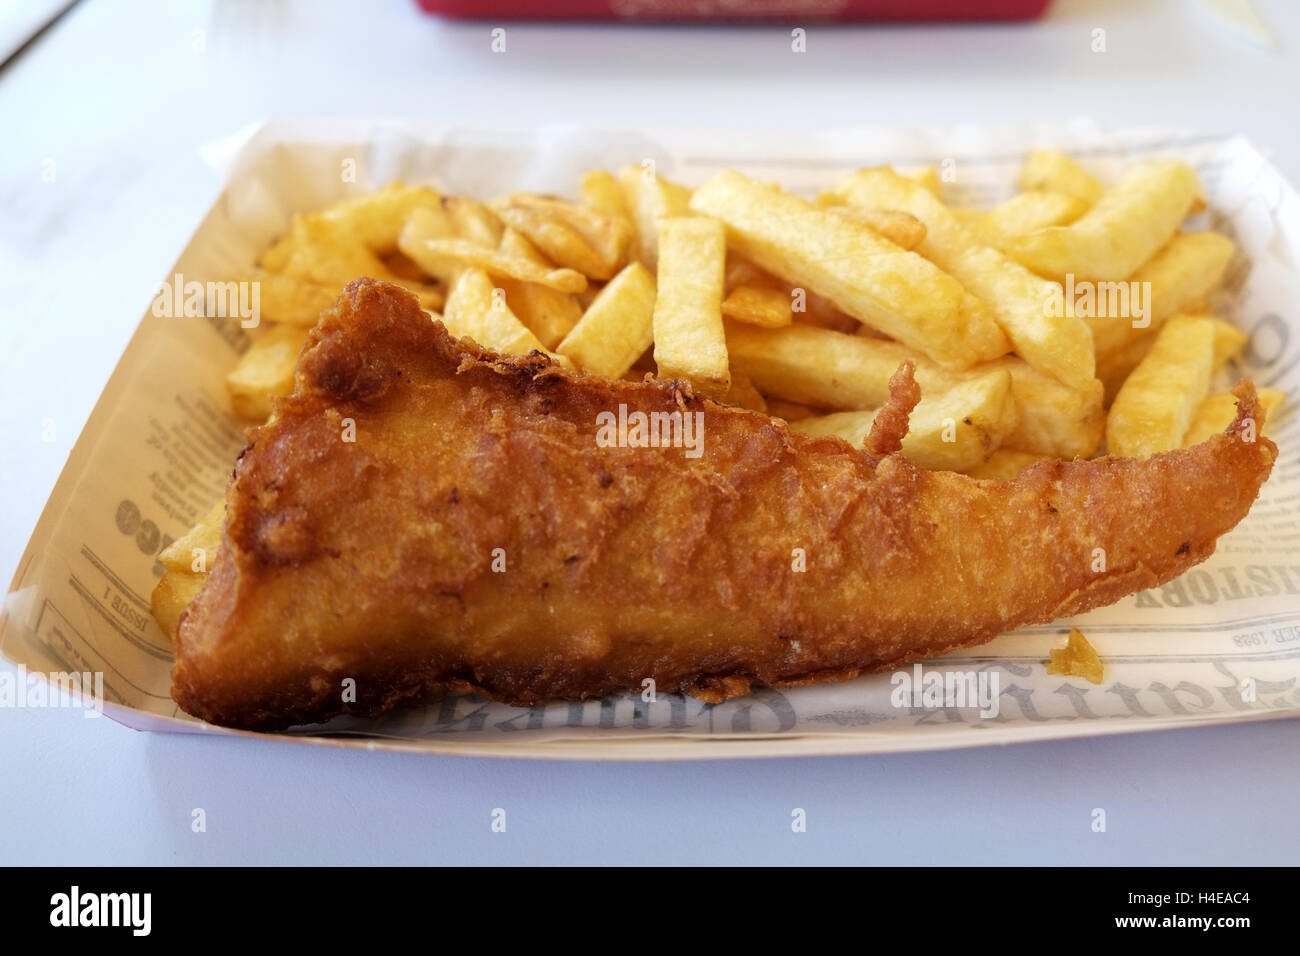 a portion of freshly cooked fish and chips from a Harry Ramsden fish and chip shop Stock Photo